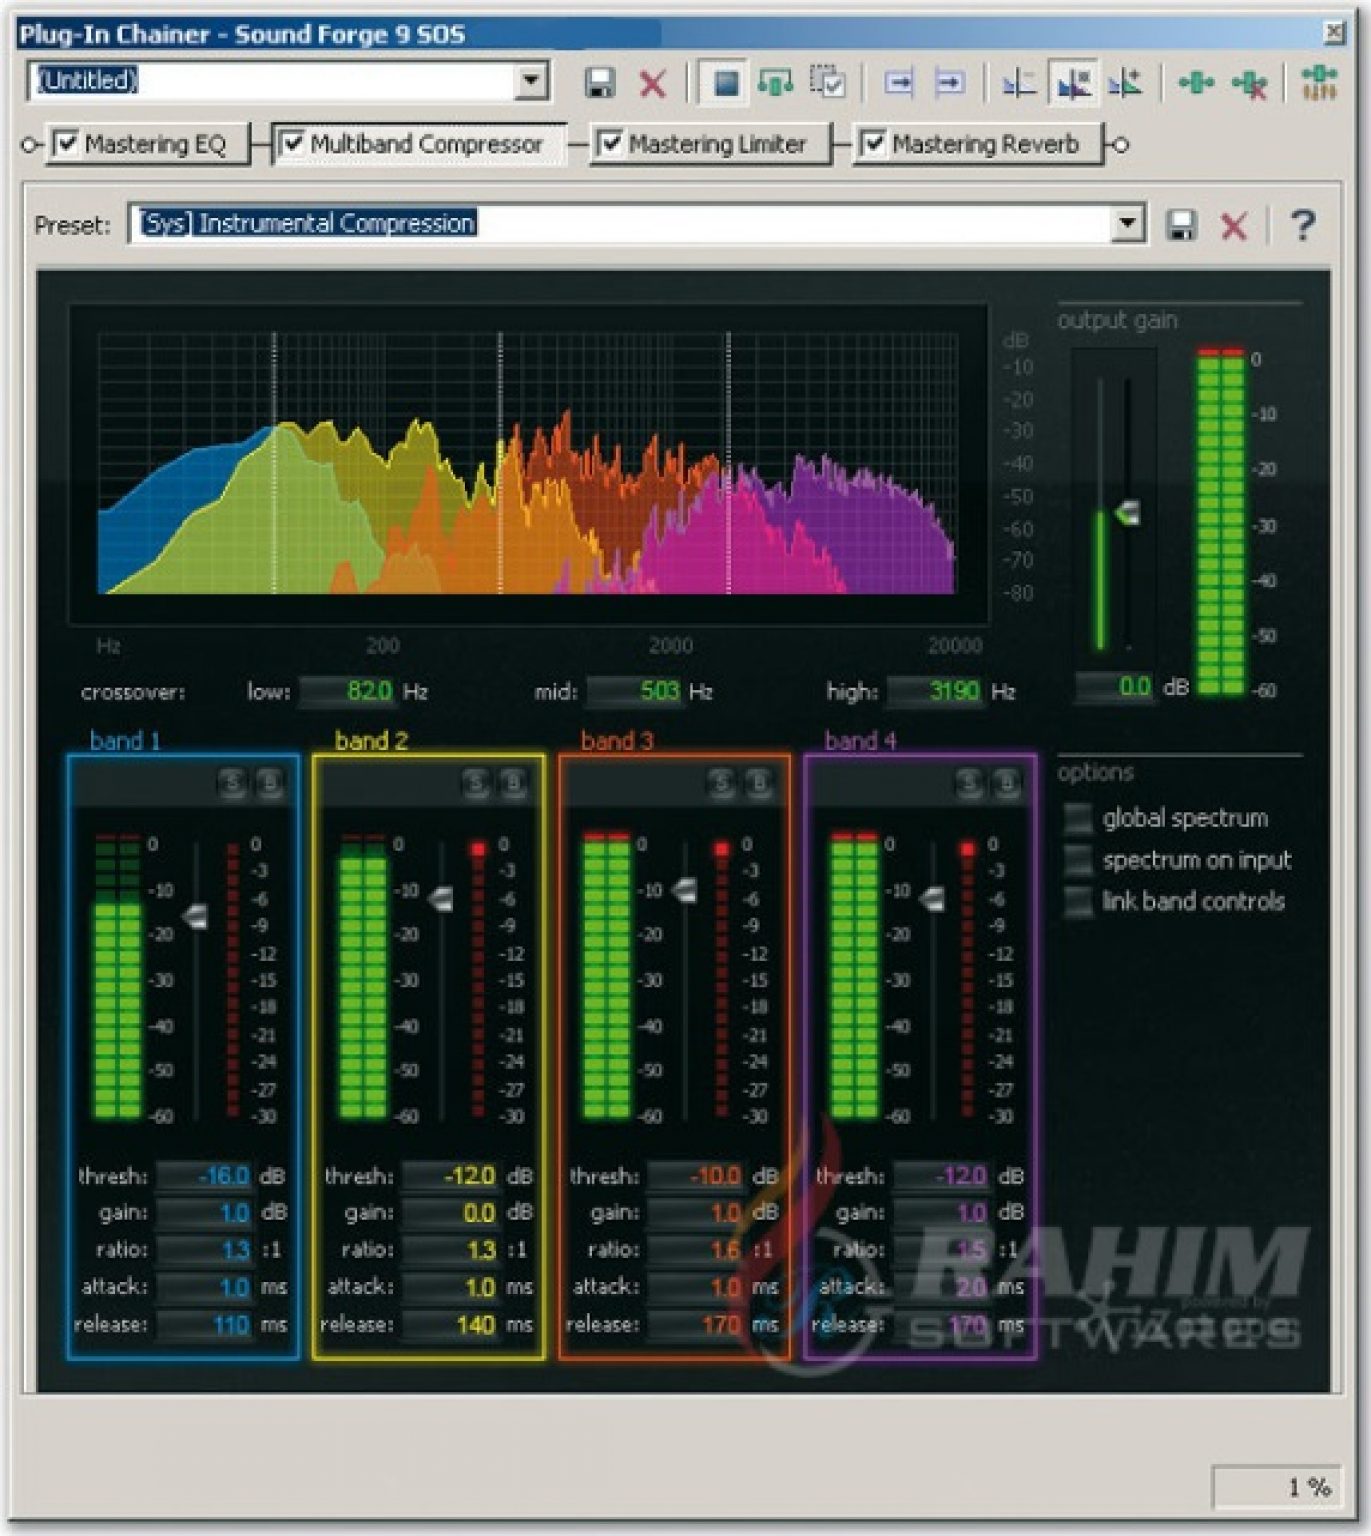 sony sound forge 9.0 free download full version